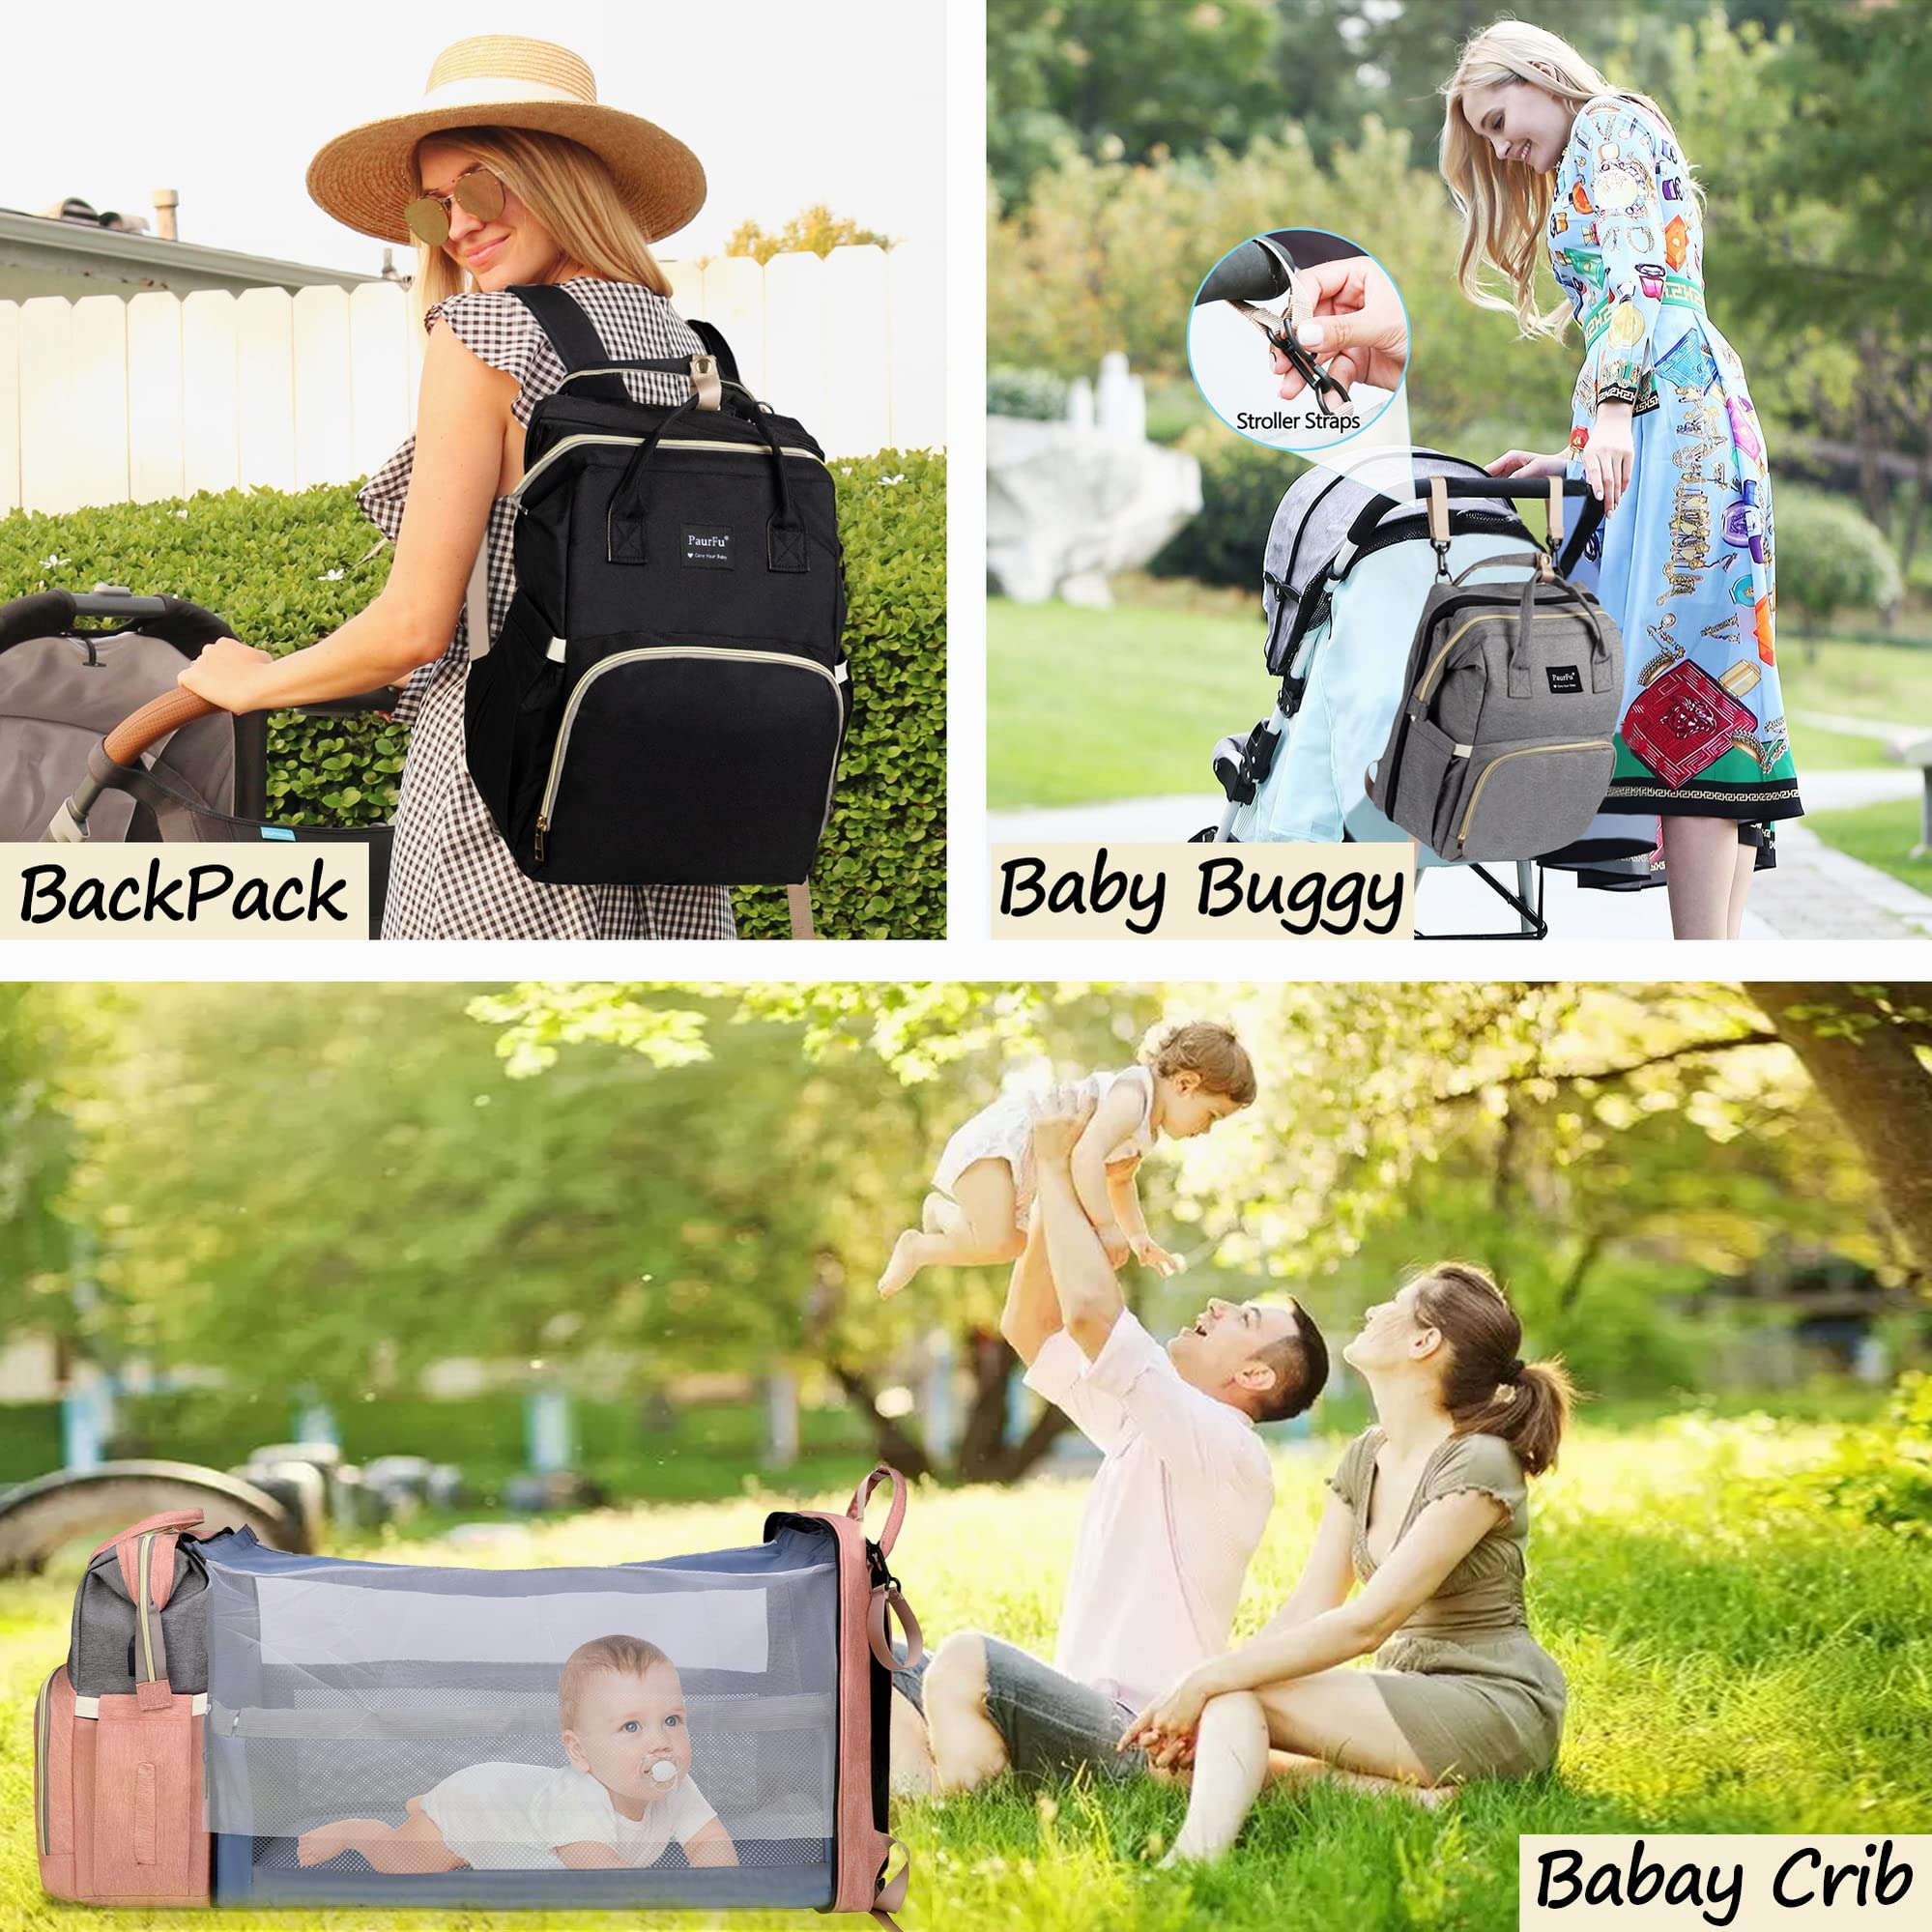 PaurFu Updated 8-in-1 Diaper Bag Backpack, Multifunctional Diaper Baby Bag for Mom Dad with Bassinet Bed,Changing Station,Soft Baby Pillow,Mosquito Net Sunshade and USB Charge Port etc.